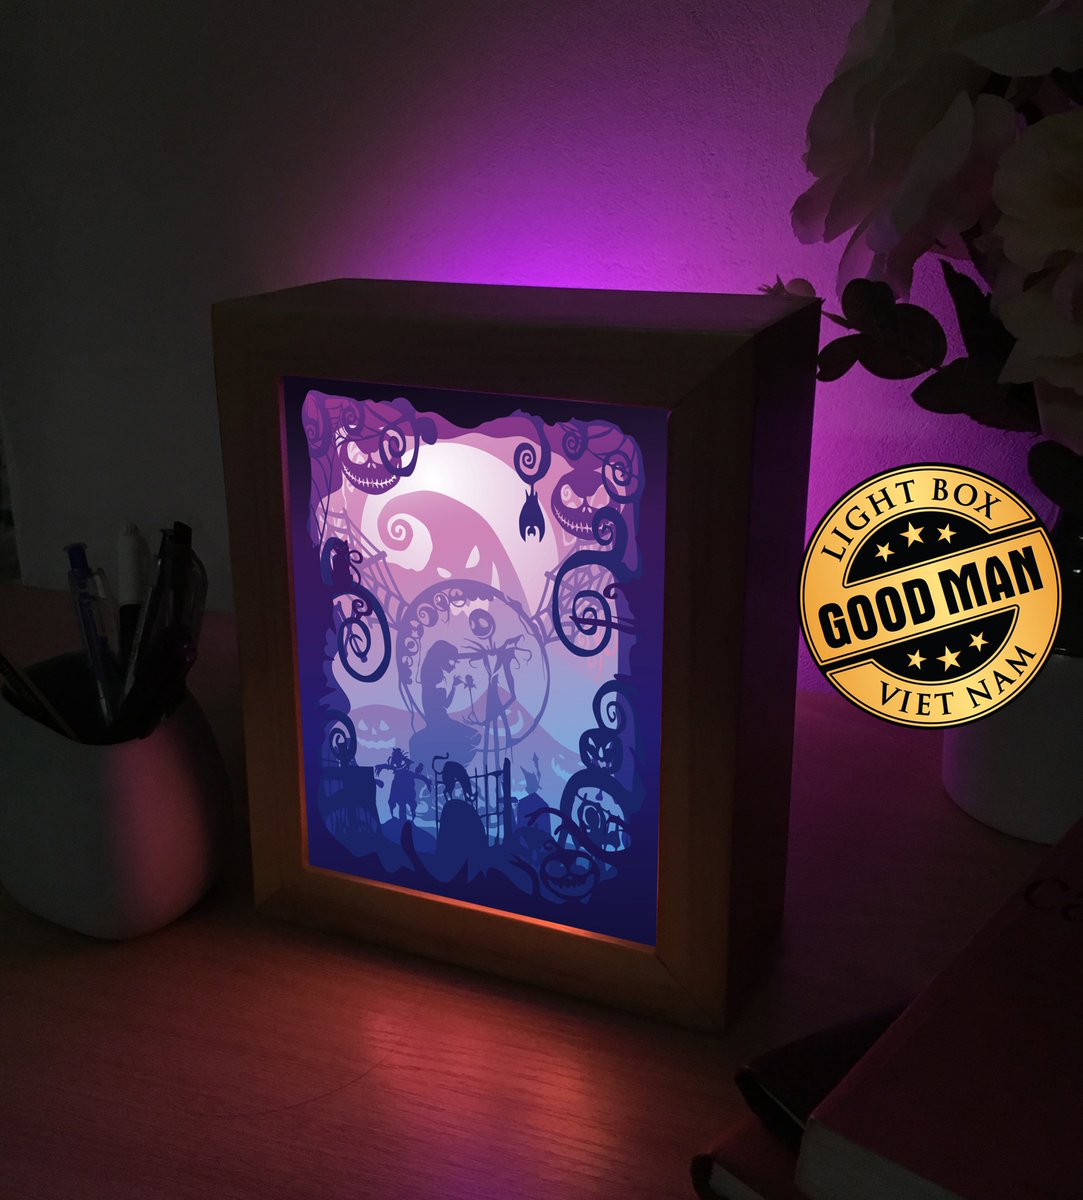 Download Lightboxgoodman On Twitter Goodman Nightmare Before Christmas 1 3d Paper Cutting Light Box Svg Template Files 3d Shadow Box Template Svg Files 20x26 Cm Order Product Here Https T Co Lsyveqbj9t Https T Co Zd5ovdrnec